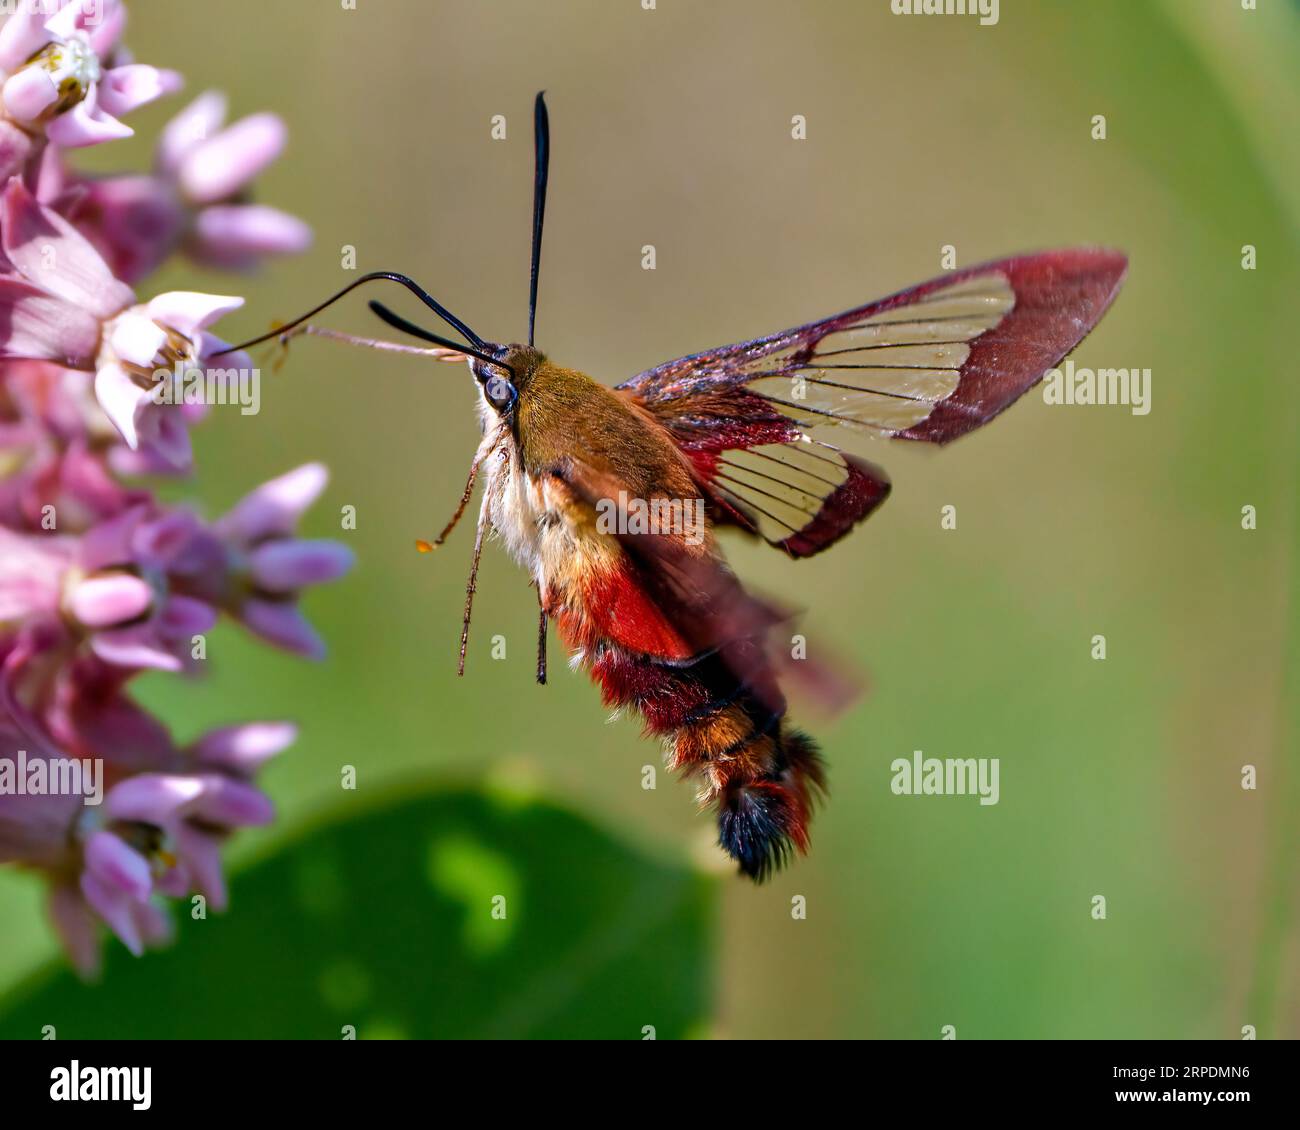 Hummingbird Clear wing Moth close-up side view fluttering over a milkweed plant and drinking nectar with a green background in its environment. Stock Photo